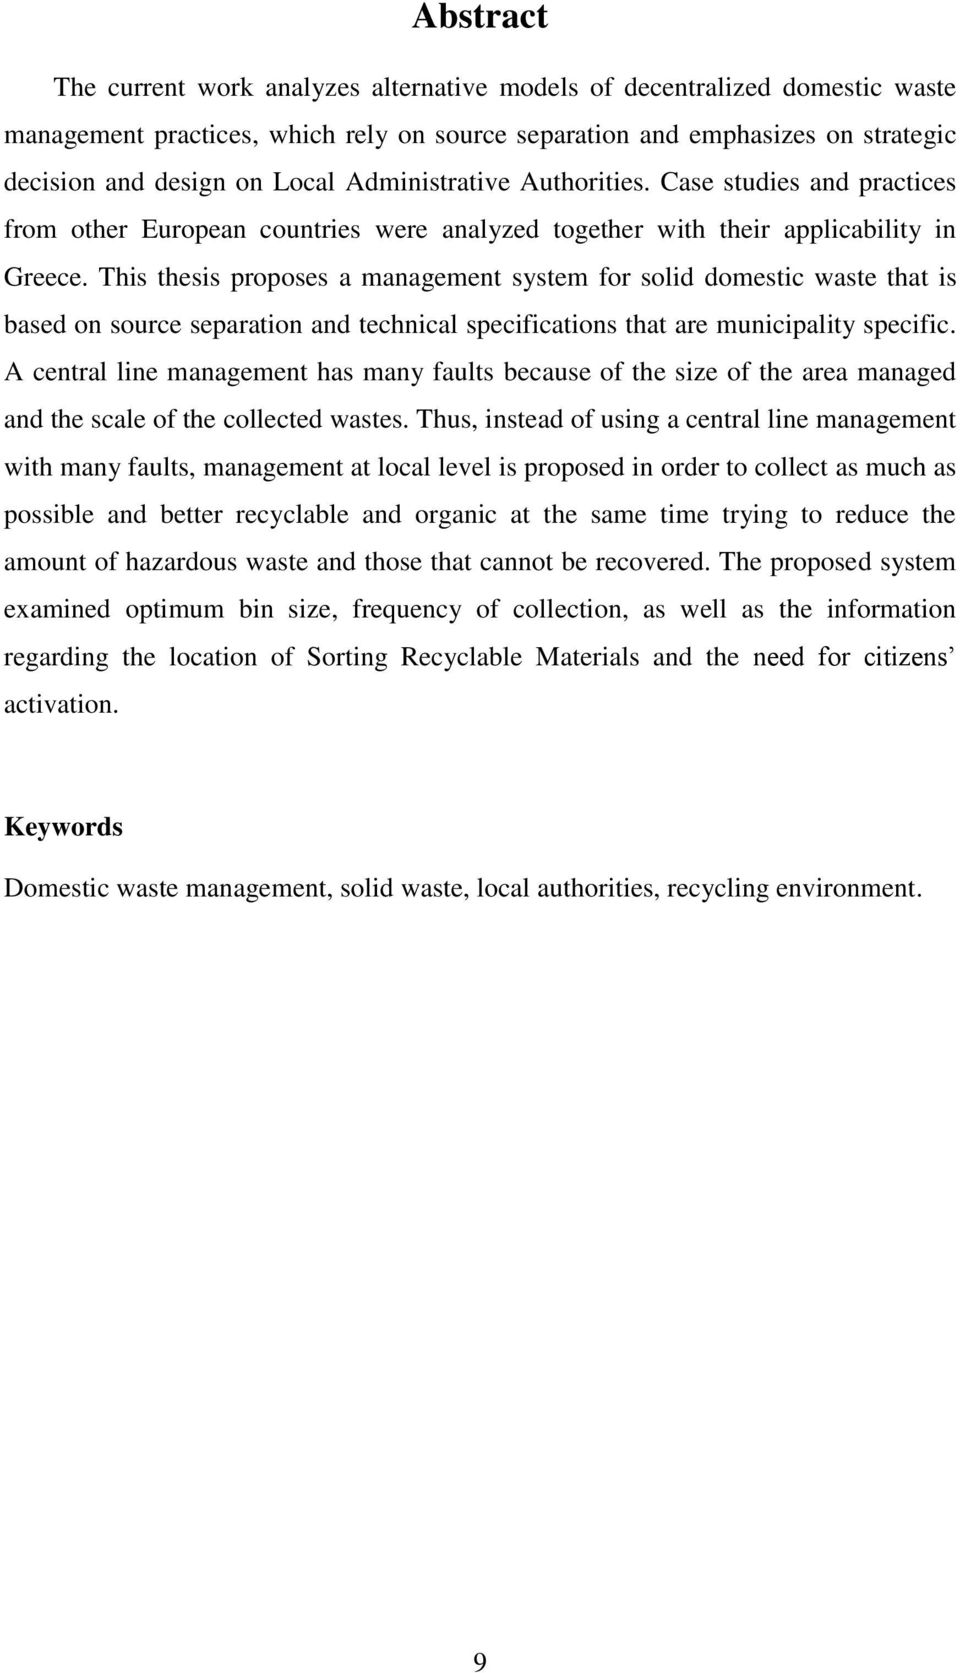 This thesis proposes a management system for solid domestic waste that is based on source separation and technical specifications that are municipality specific.